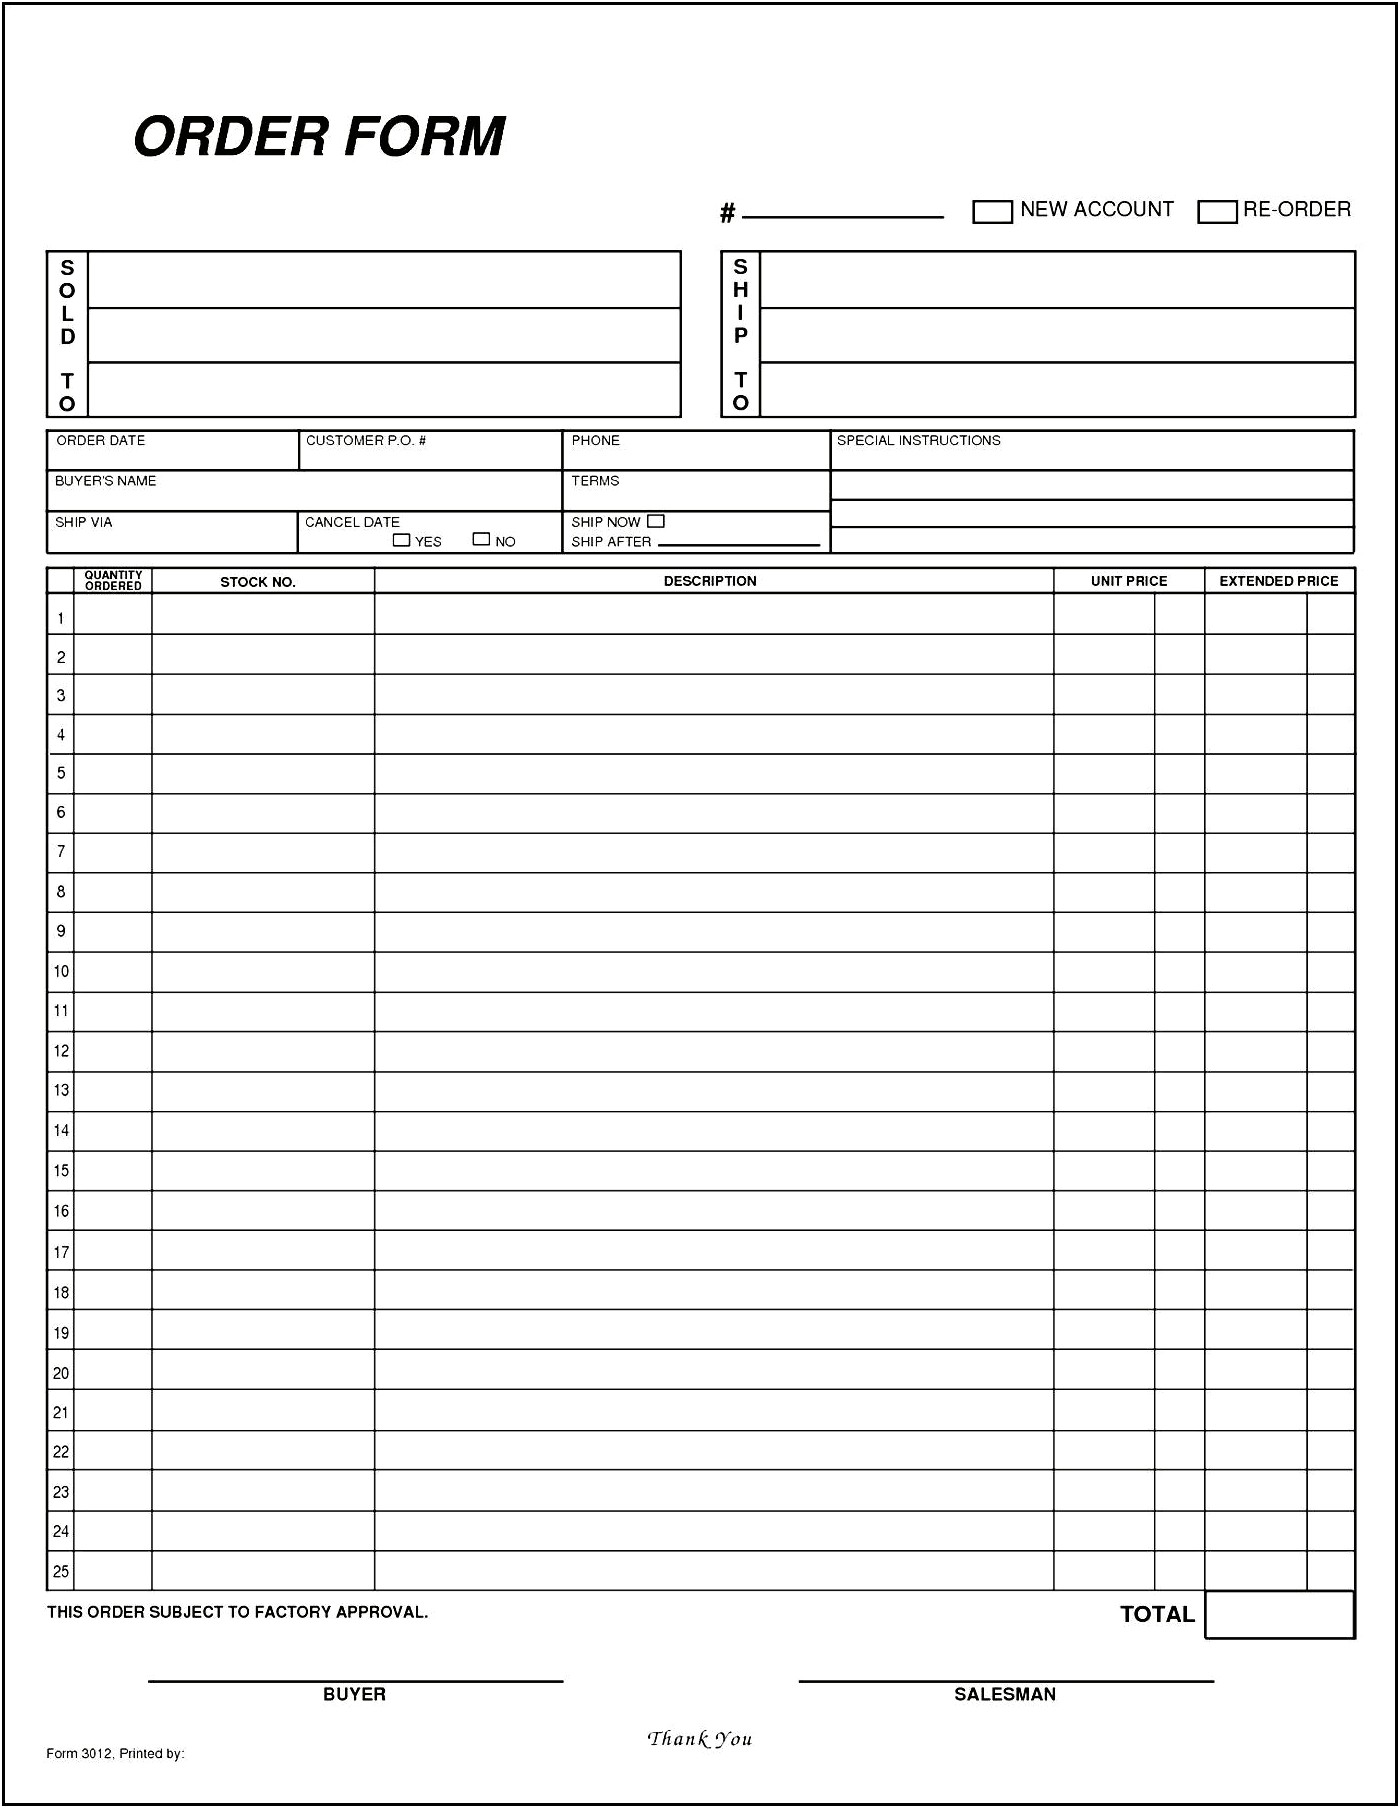 Blank Design Order Forms Templates Free